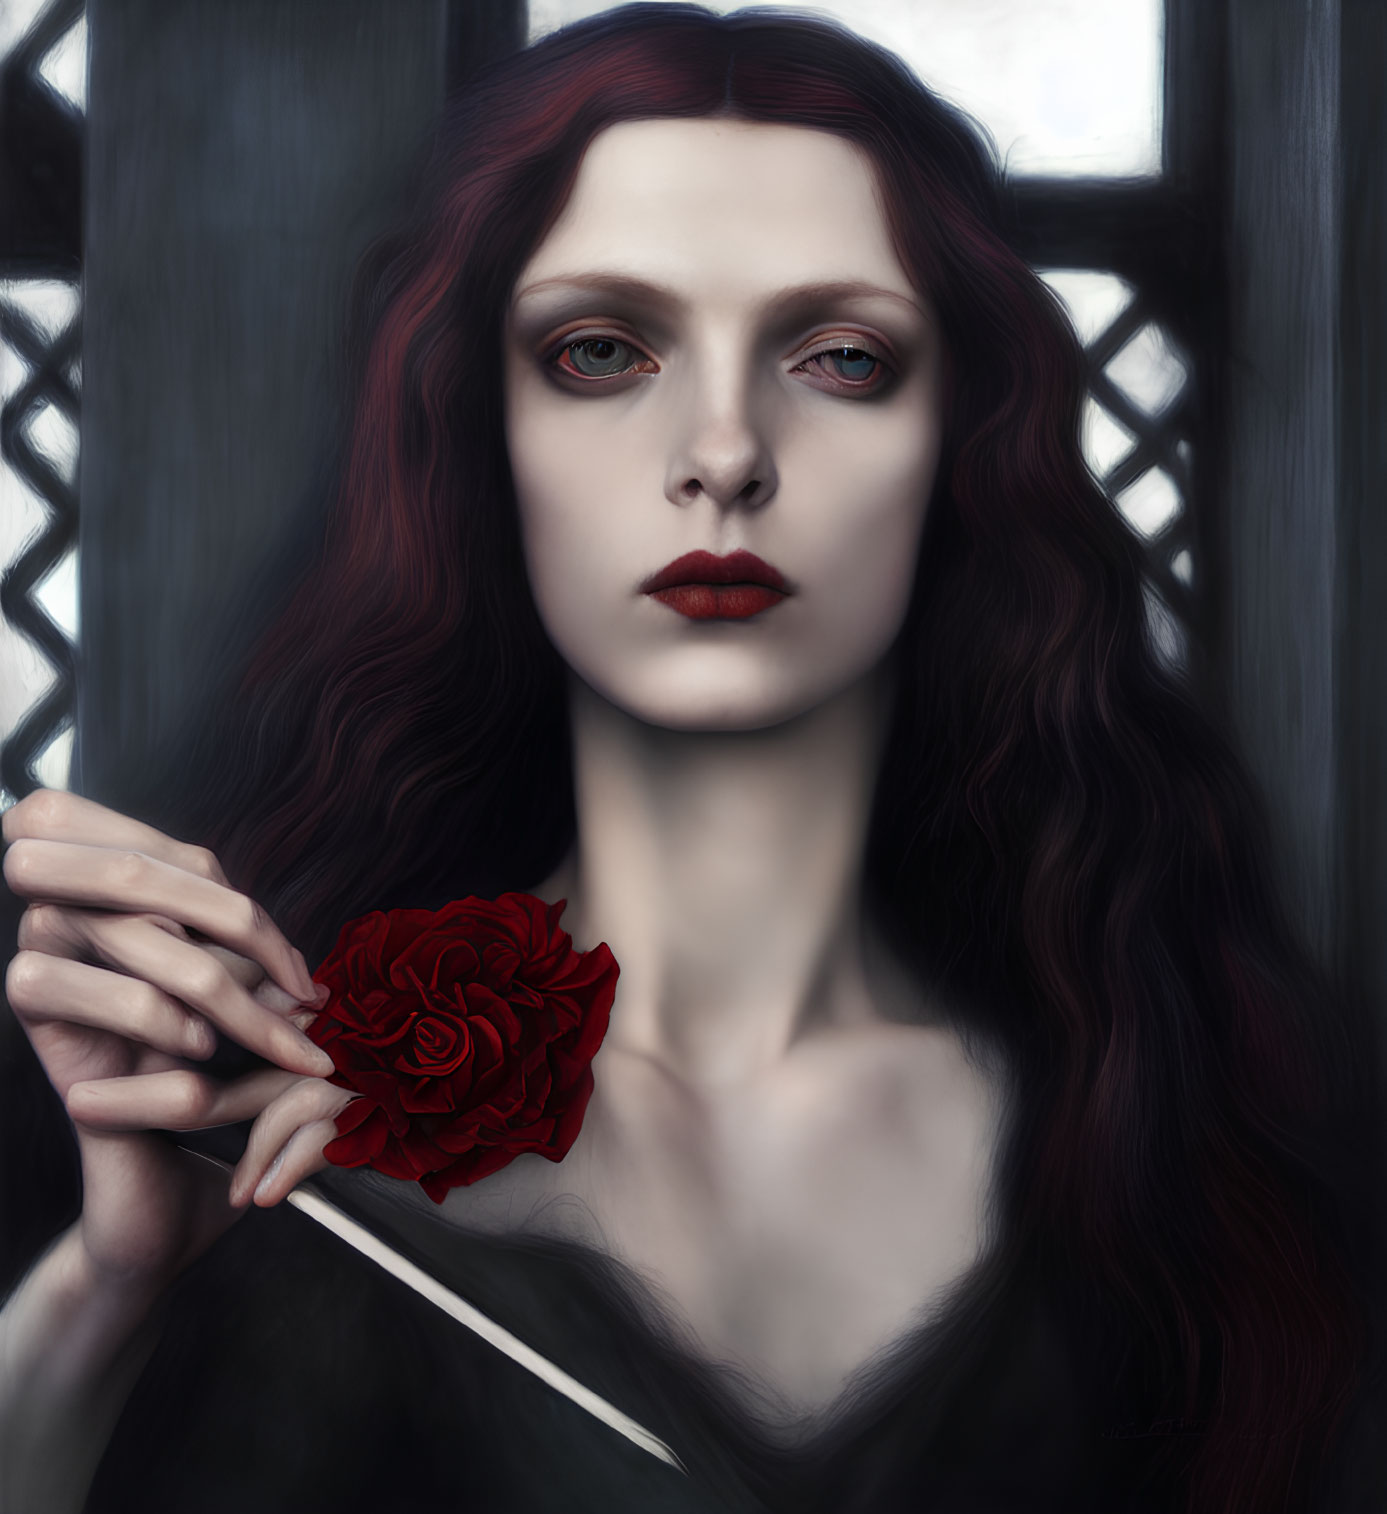 Red-haired woman holding red rose by dark window